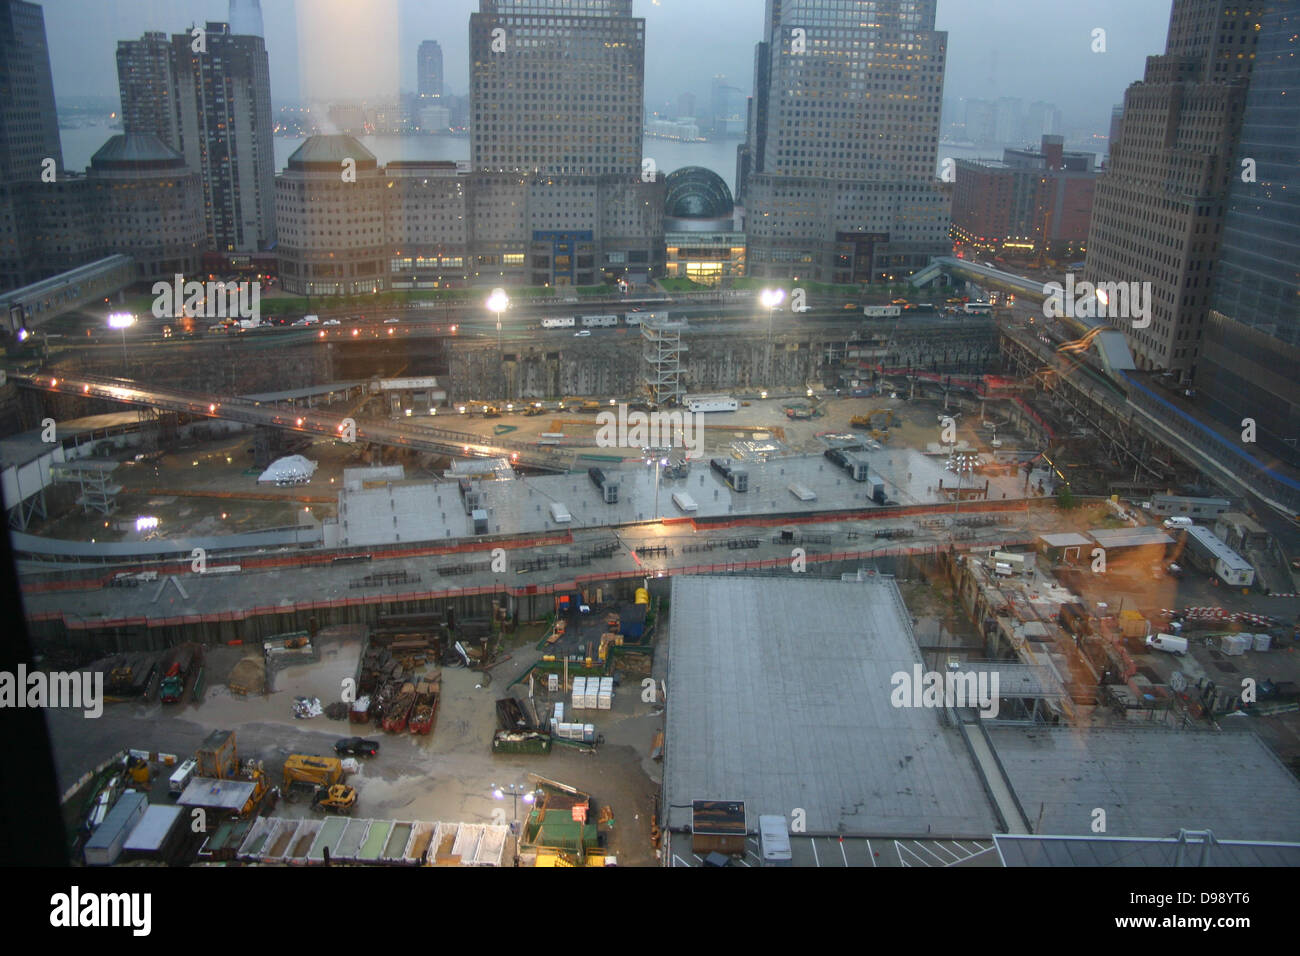 Ground Zero New York City 2006 showing the construction site where the Trade Towers had stood prior to their destruction in a Terrorist attack in 2001 Stock Photo